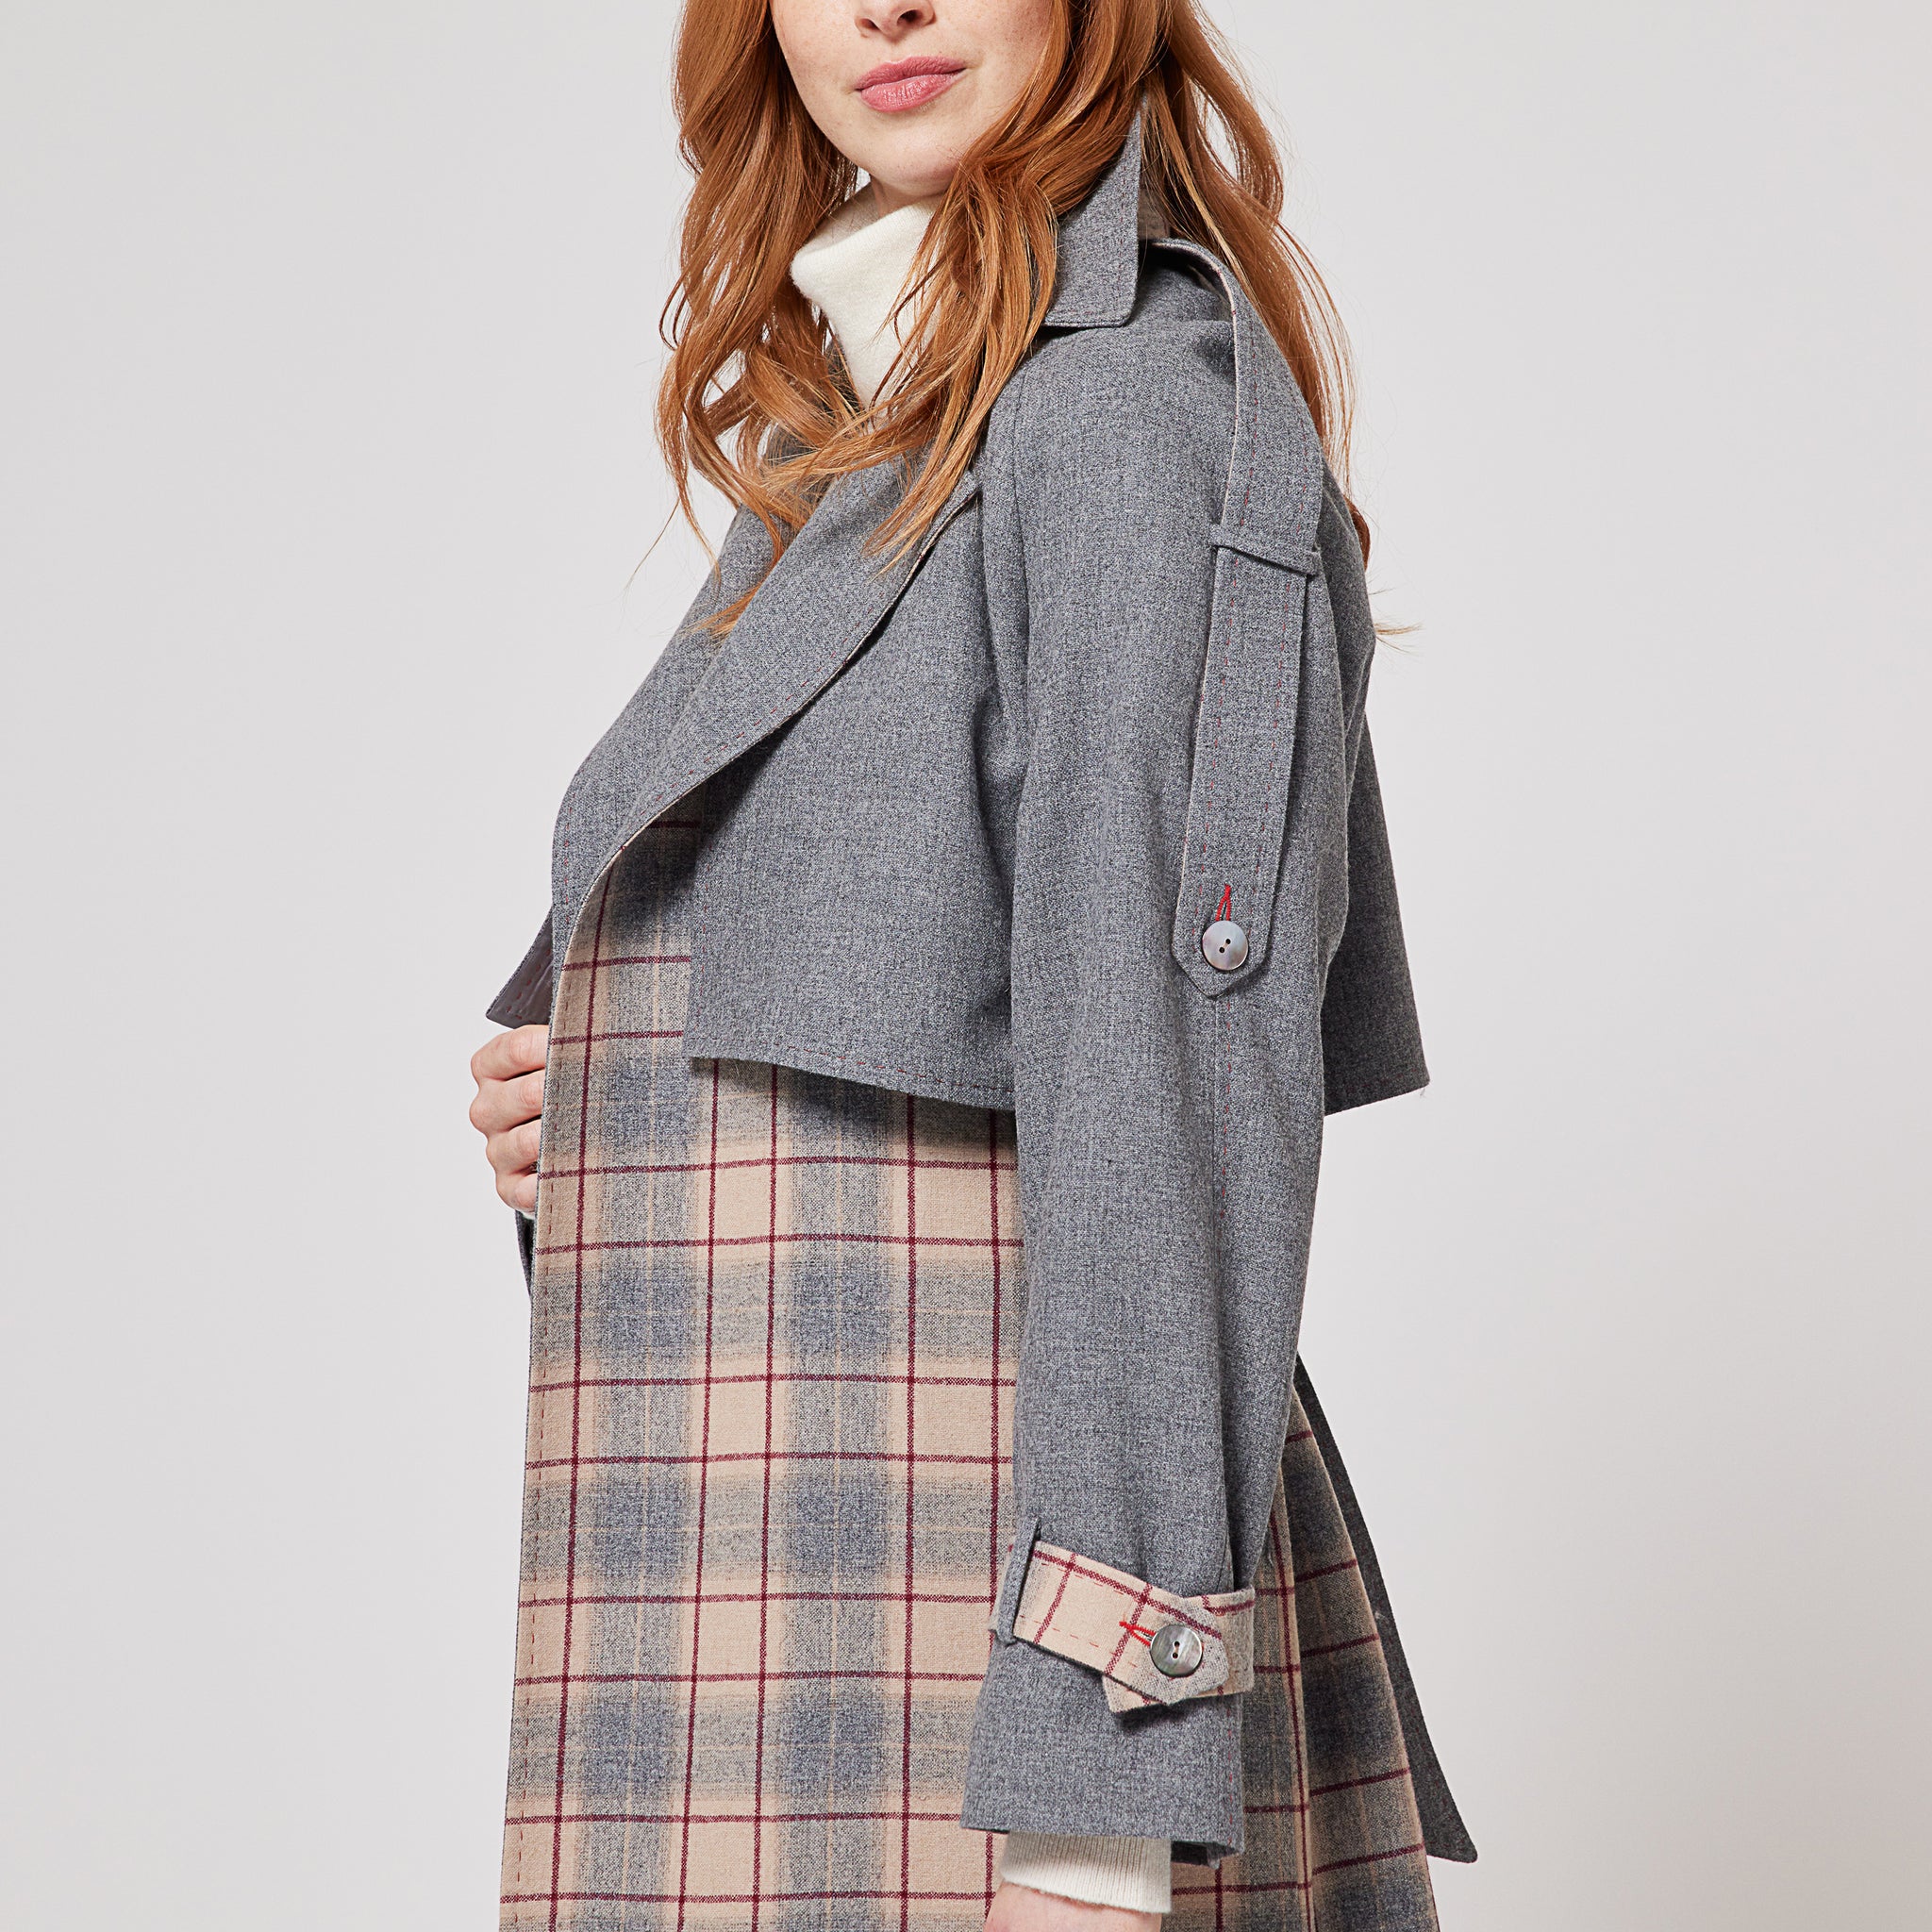 Bogd Cashmere Trench Coat - Grey & Pink